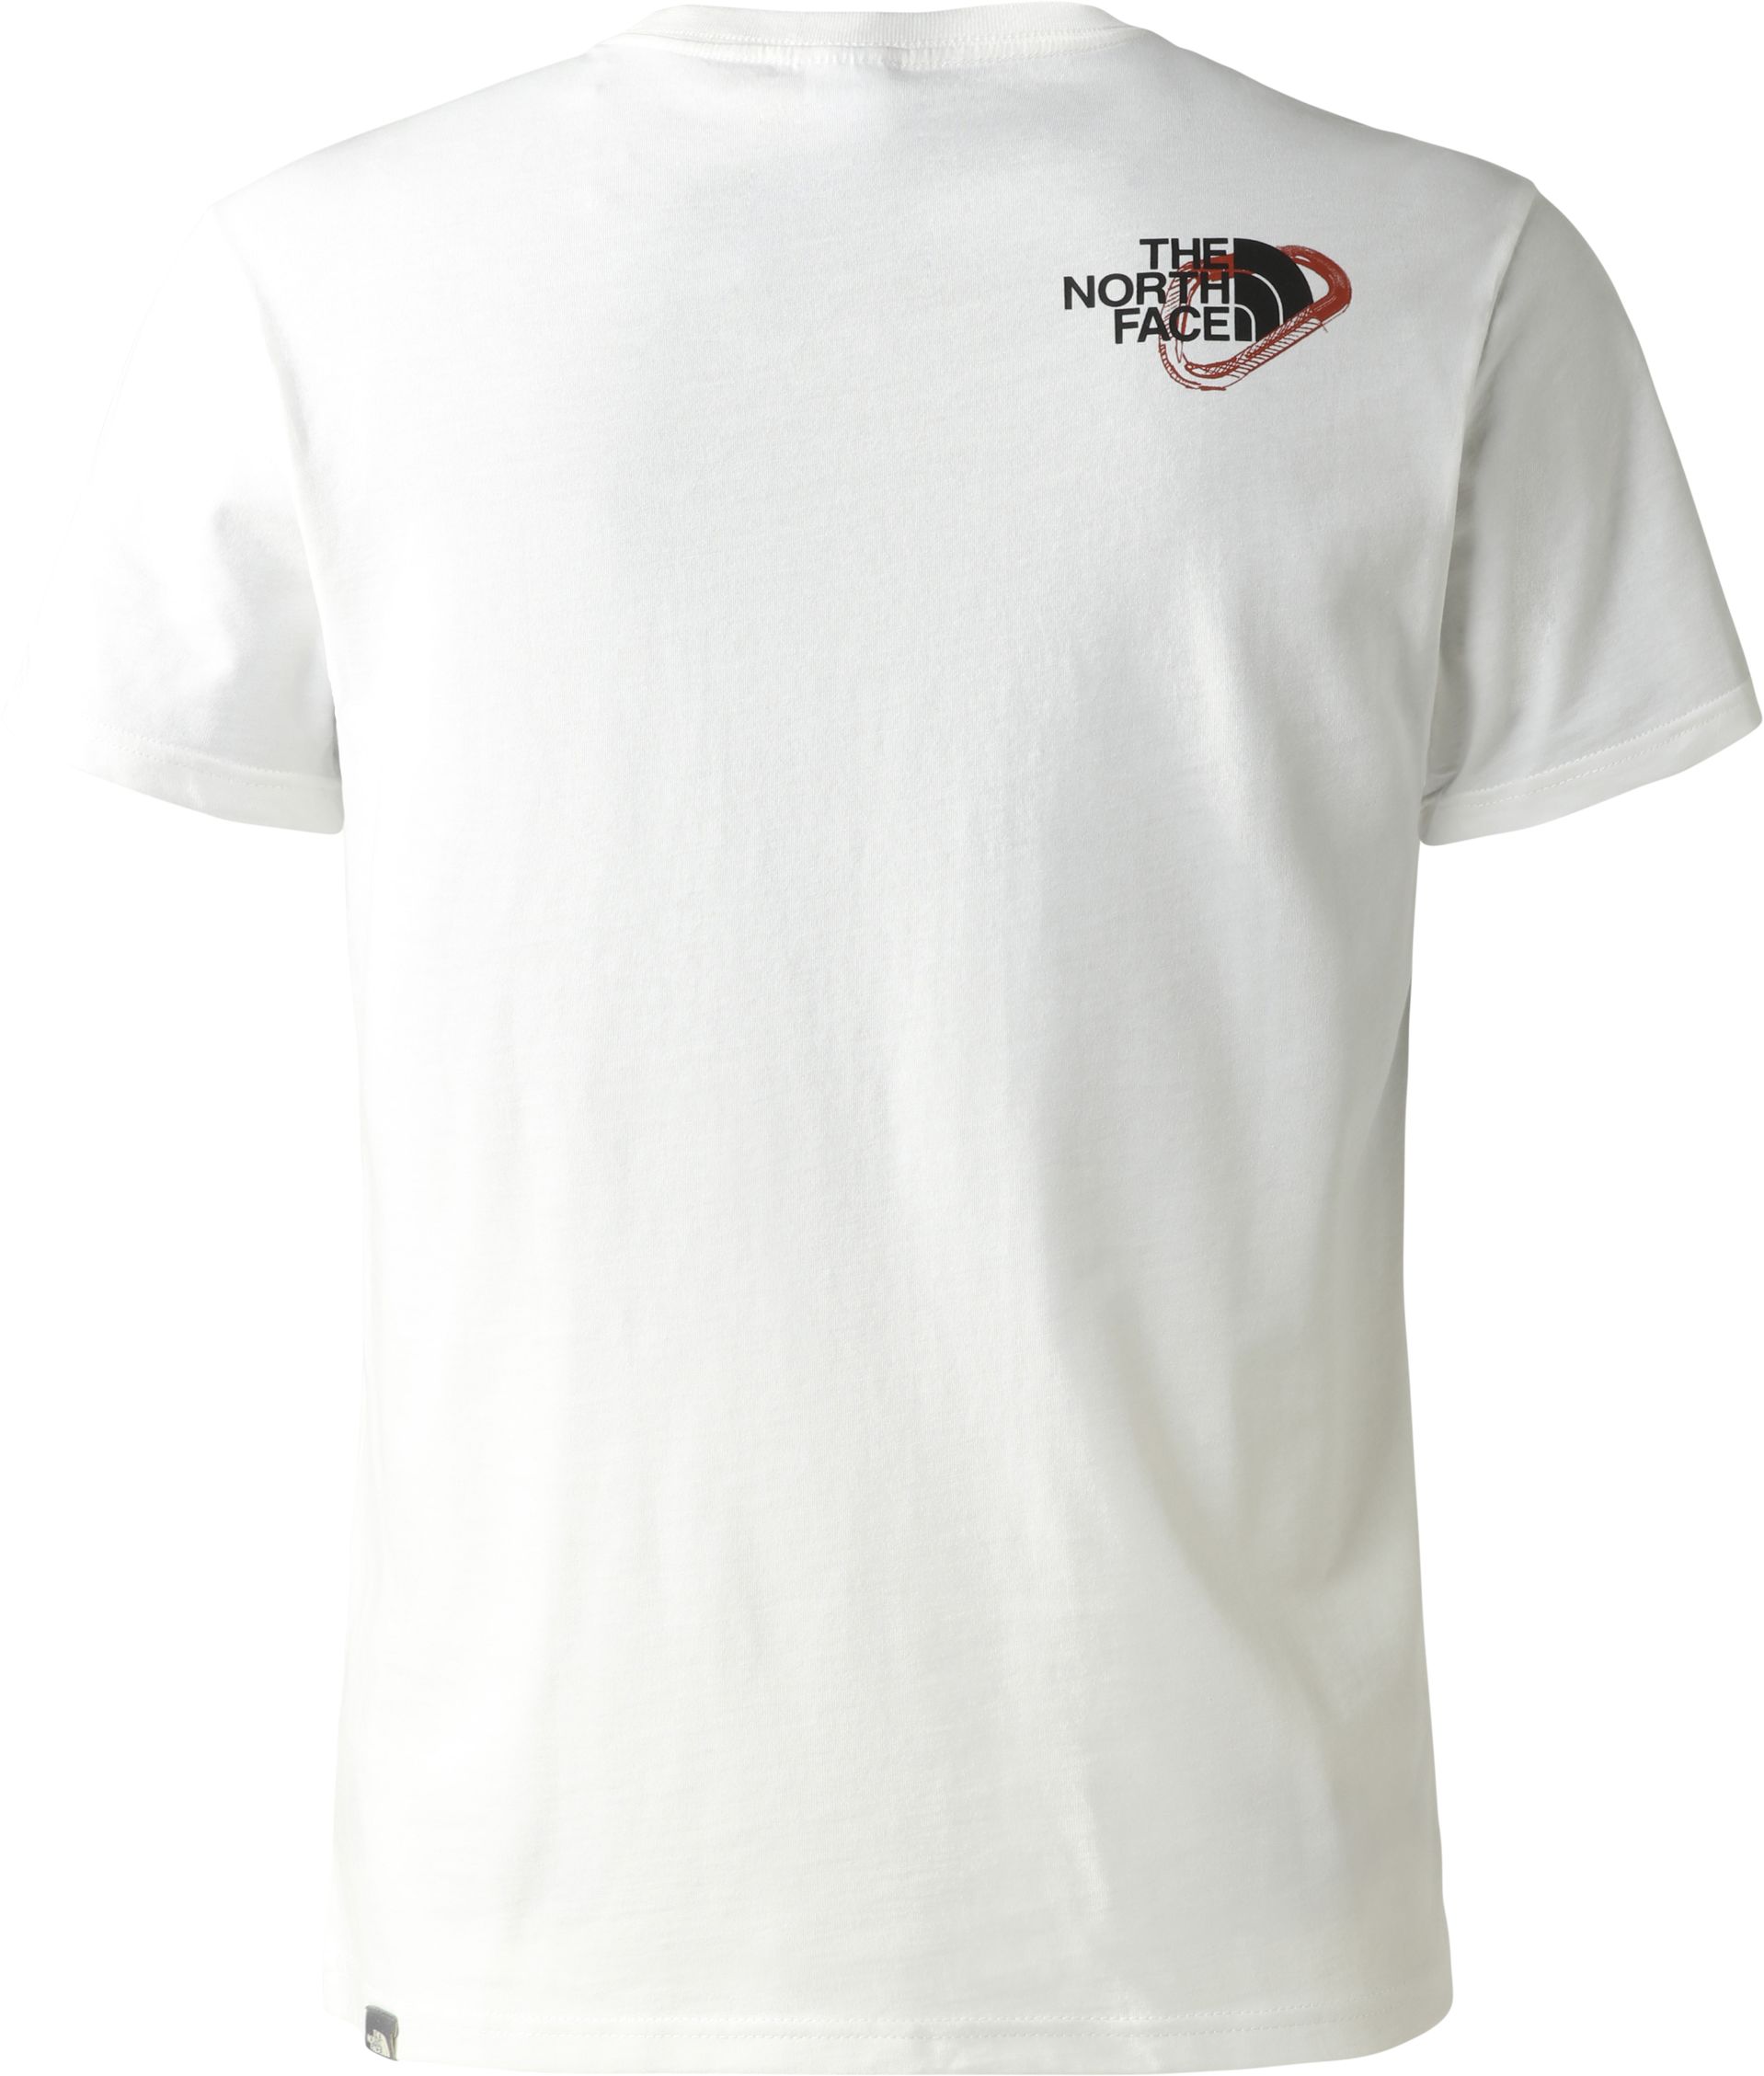 THE NORTH FACE, M OUTDOOR S/S GRAPHIC TEE